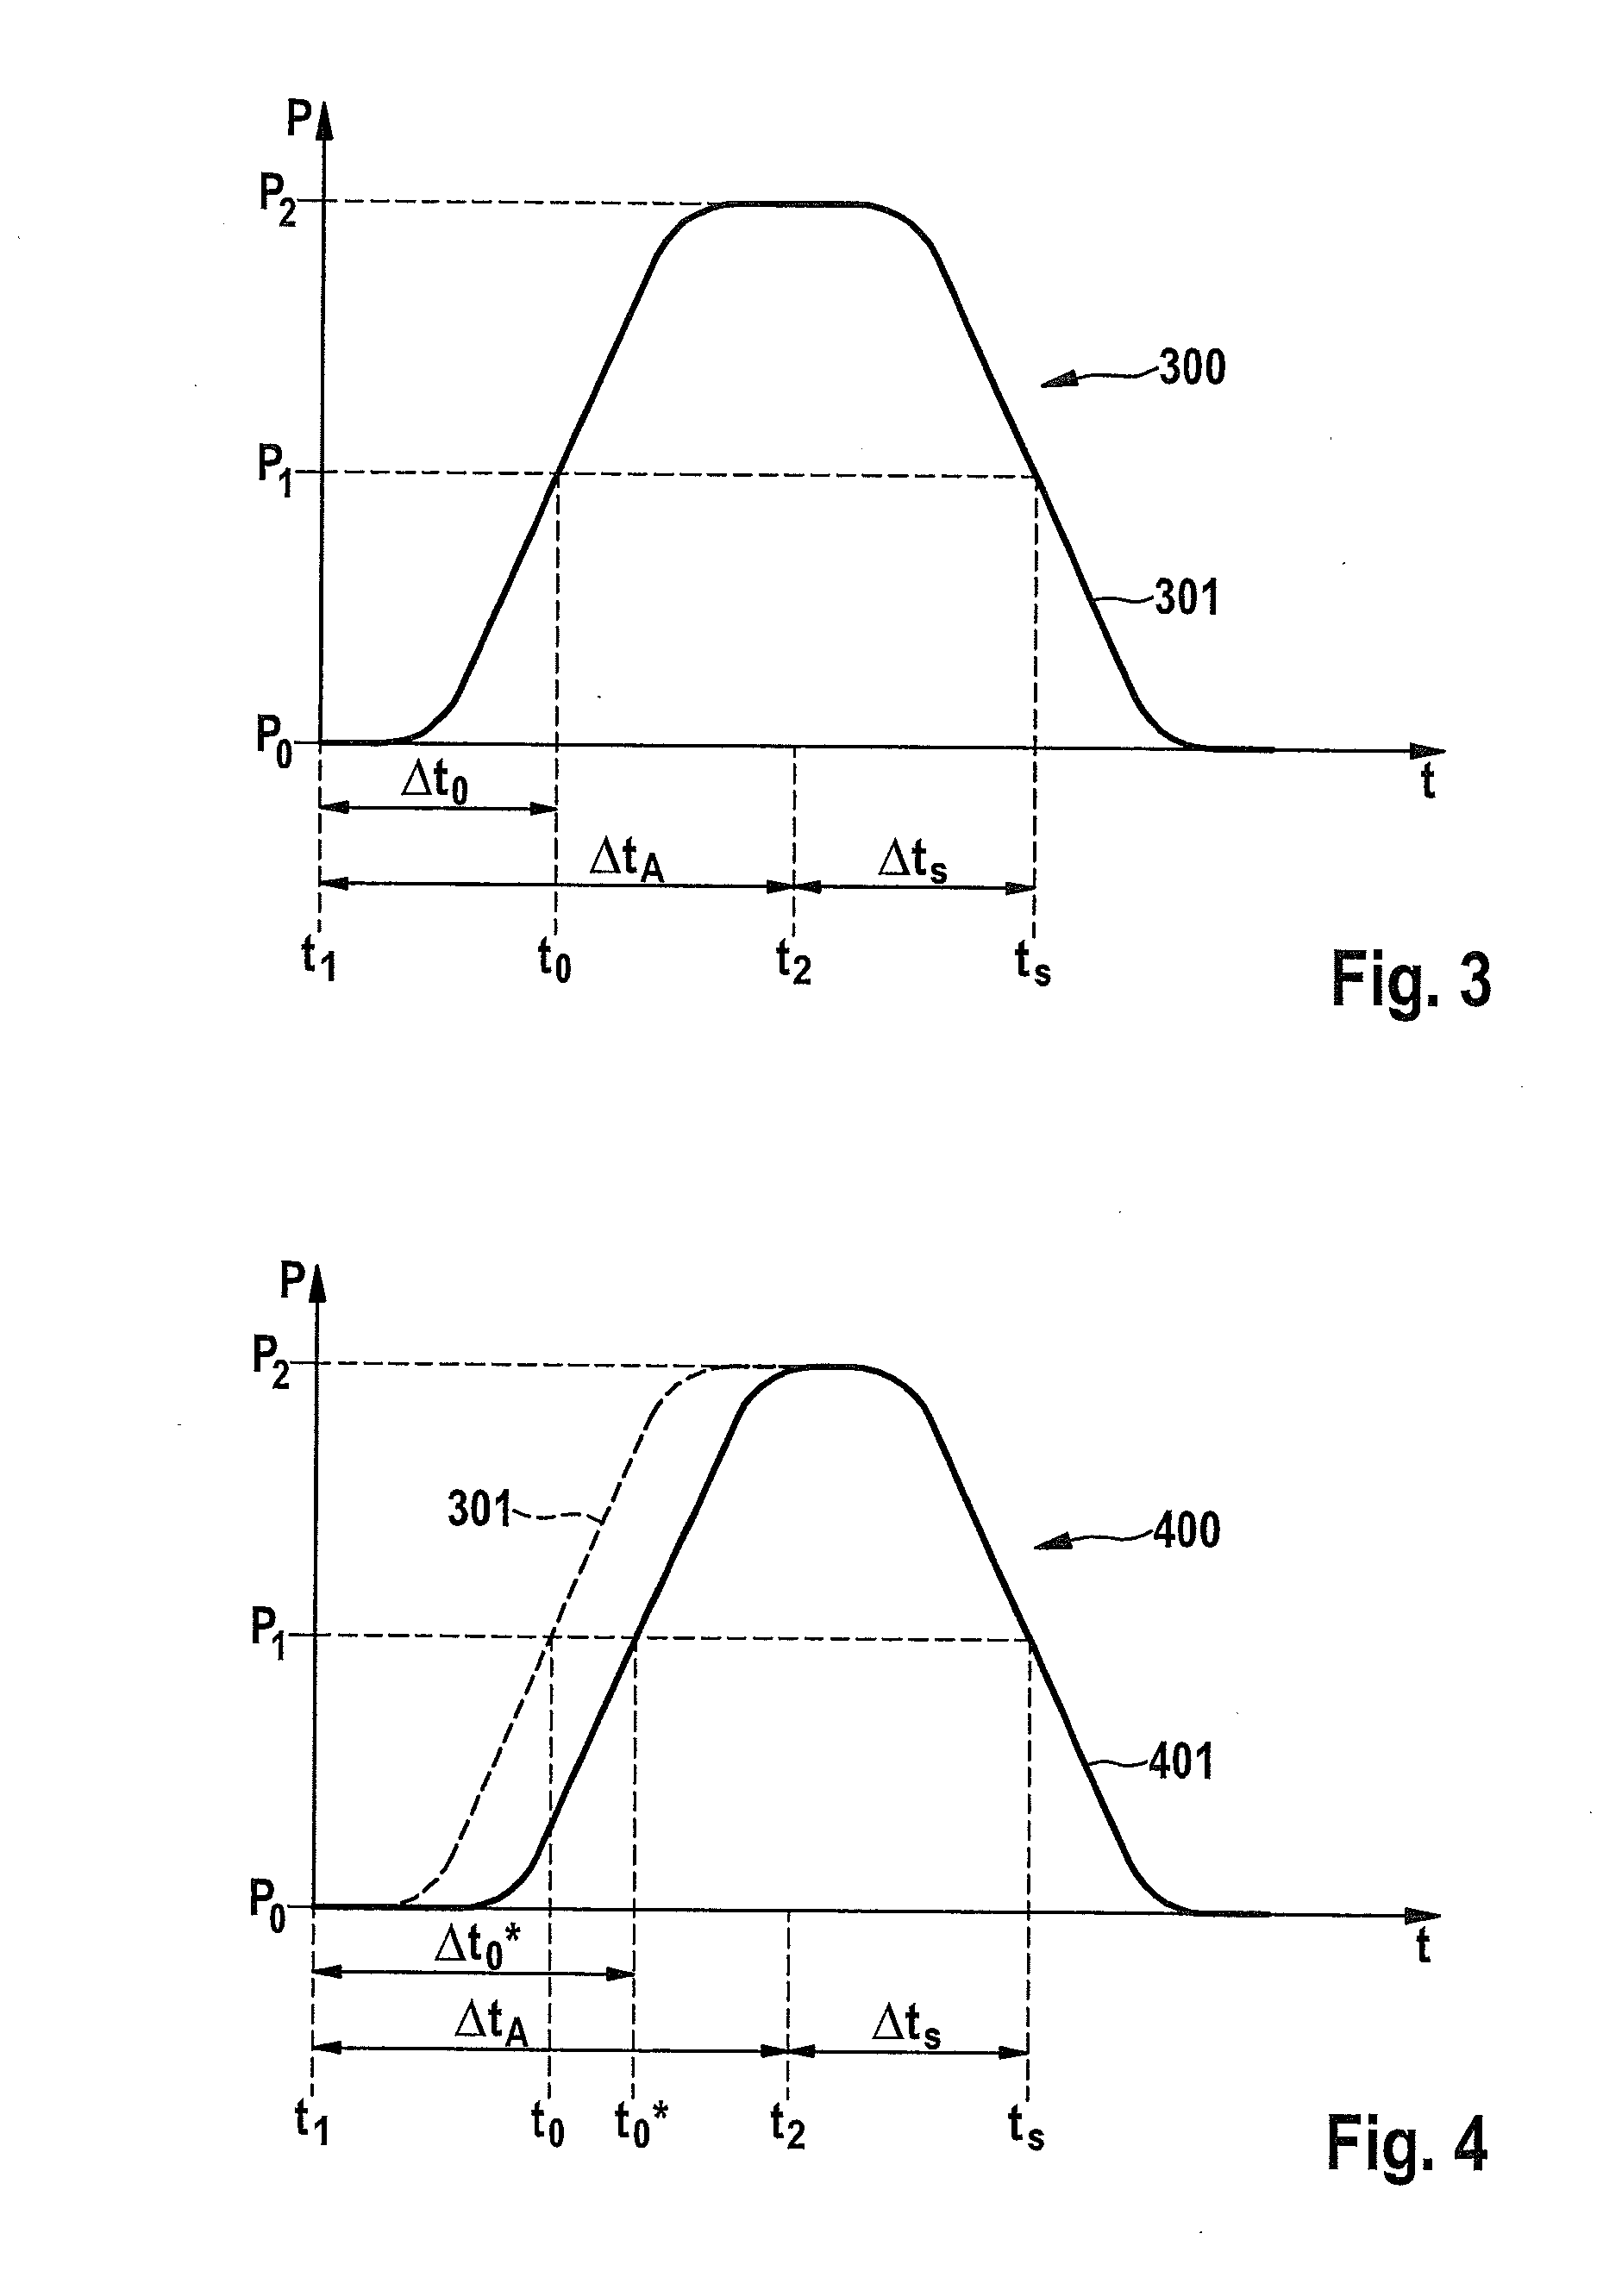 Method for detecting an error in the opening behavior of an injector